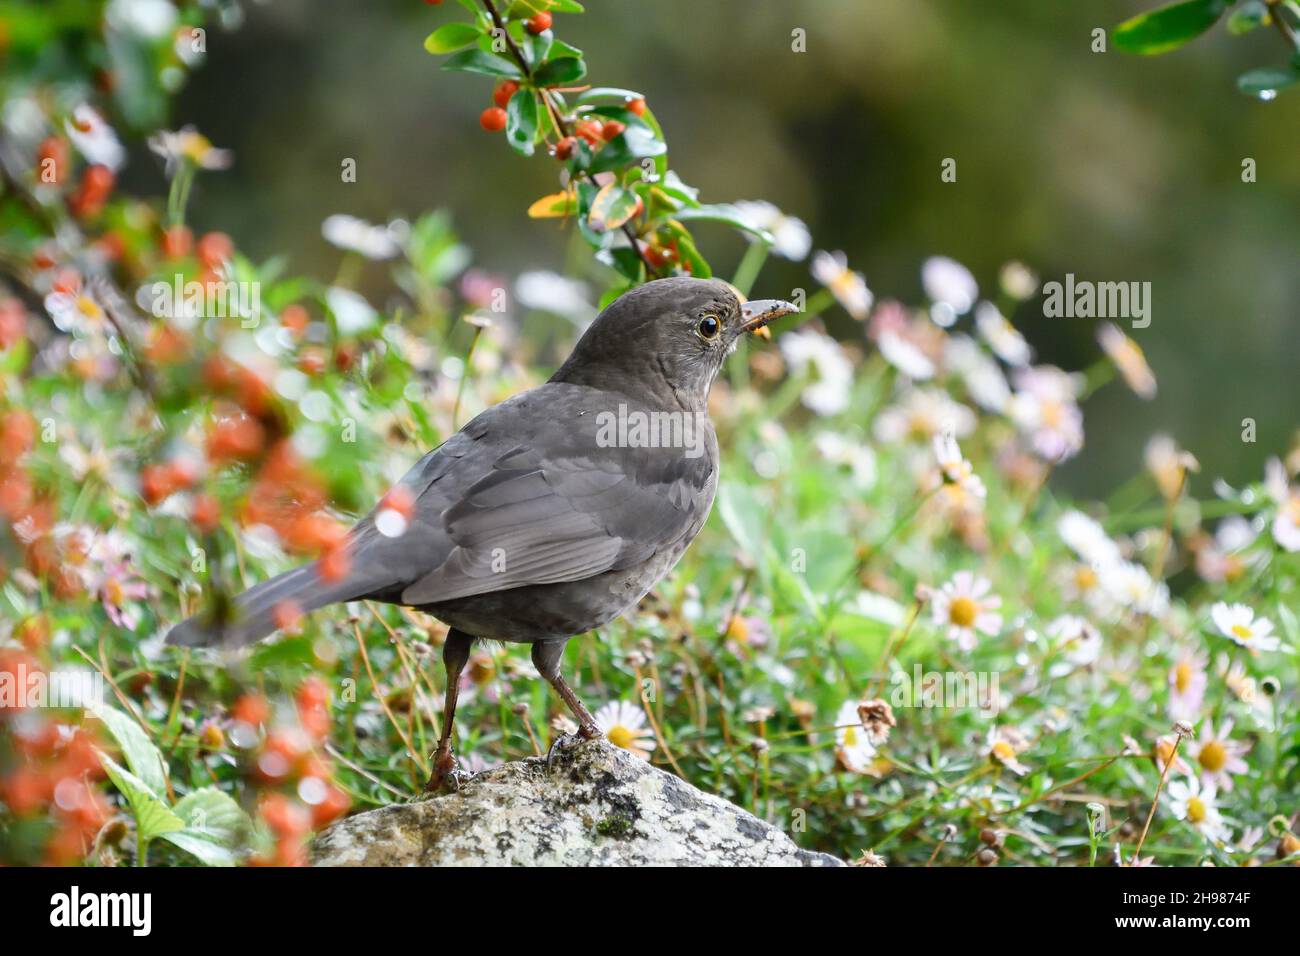 Close-up of a common blackbird among the garden flowers Stock Photo